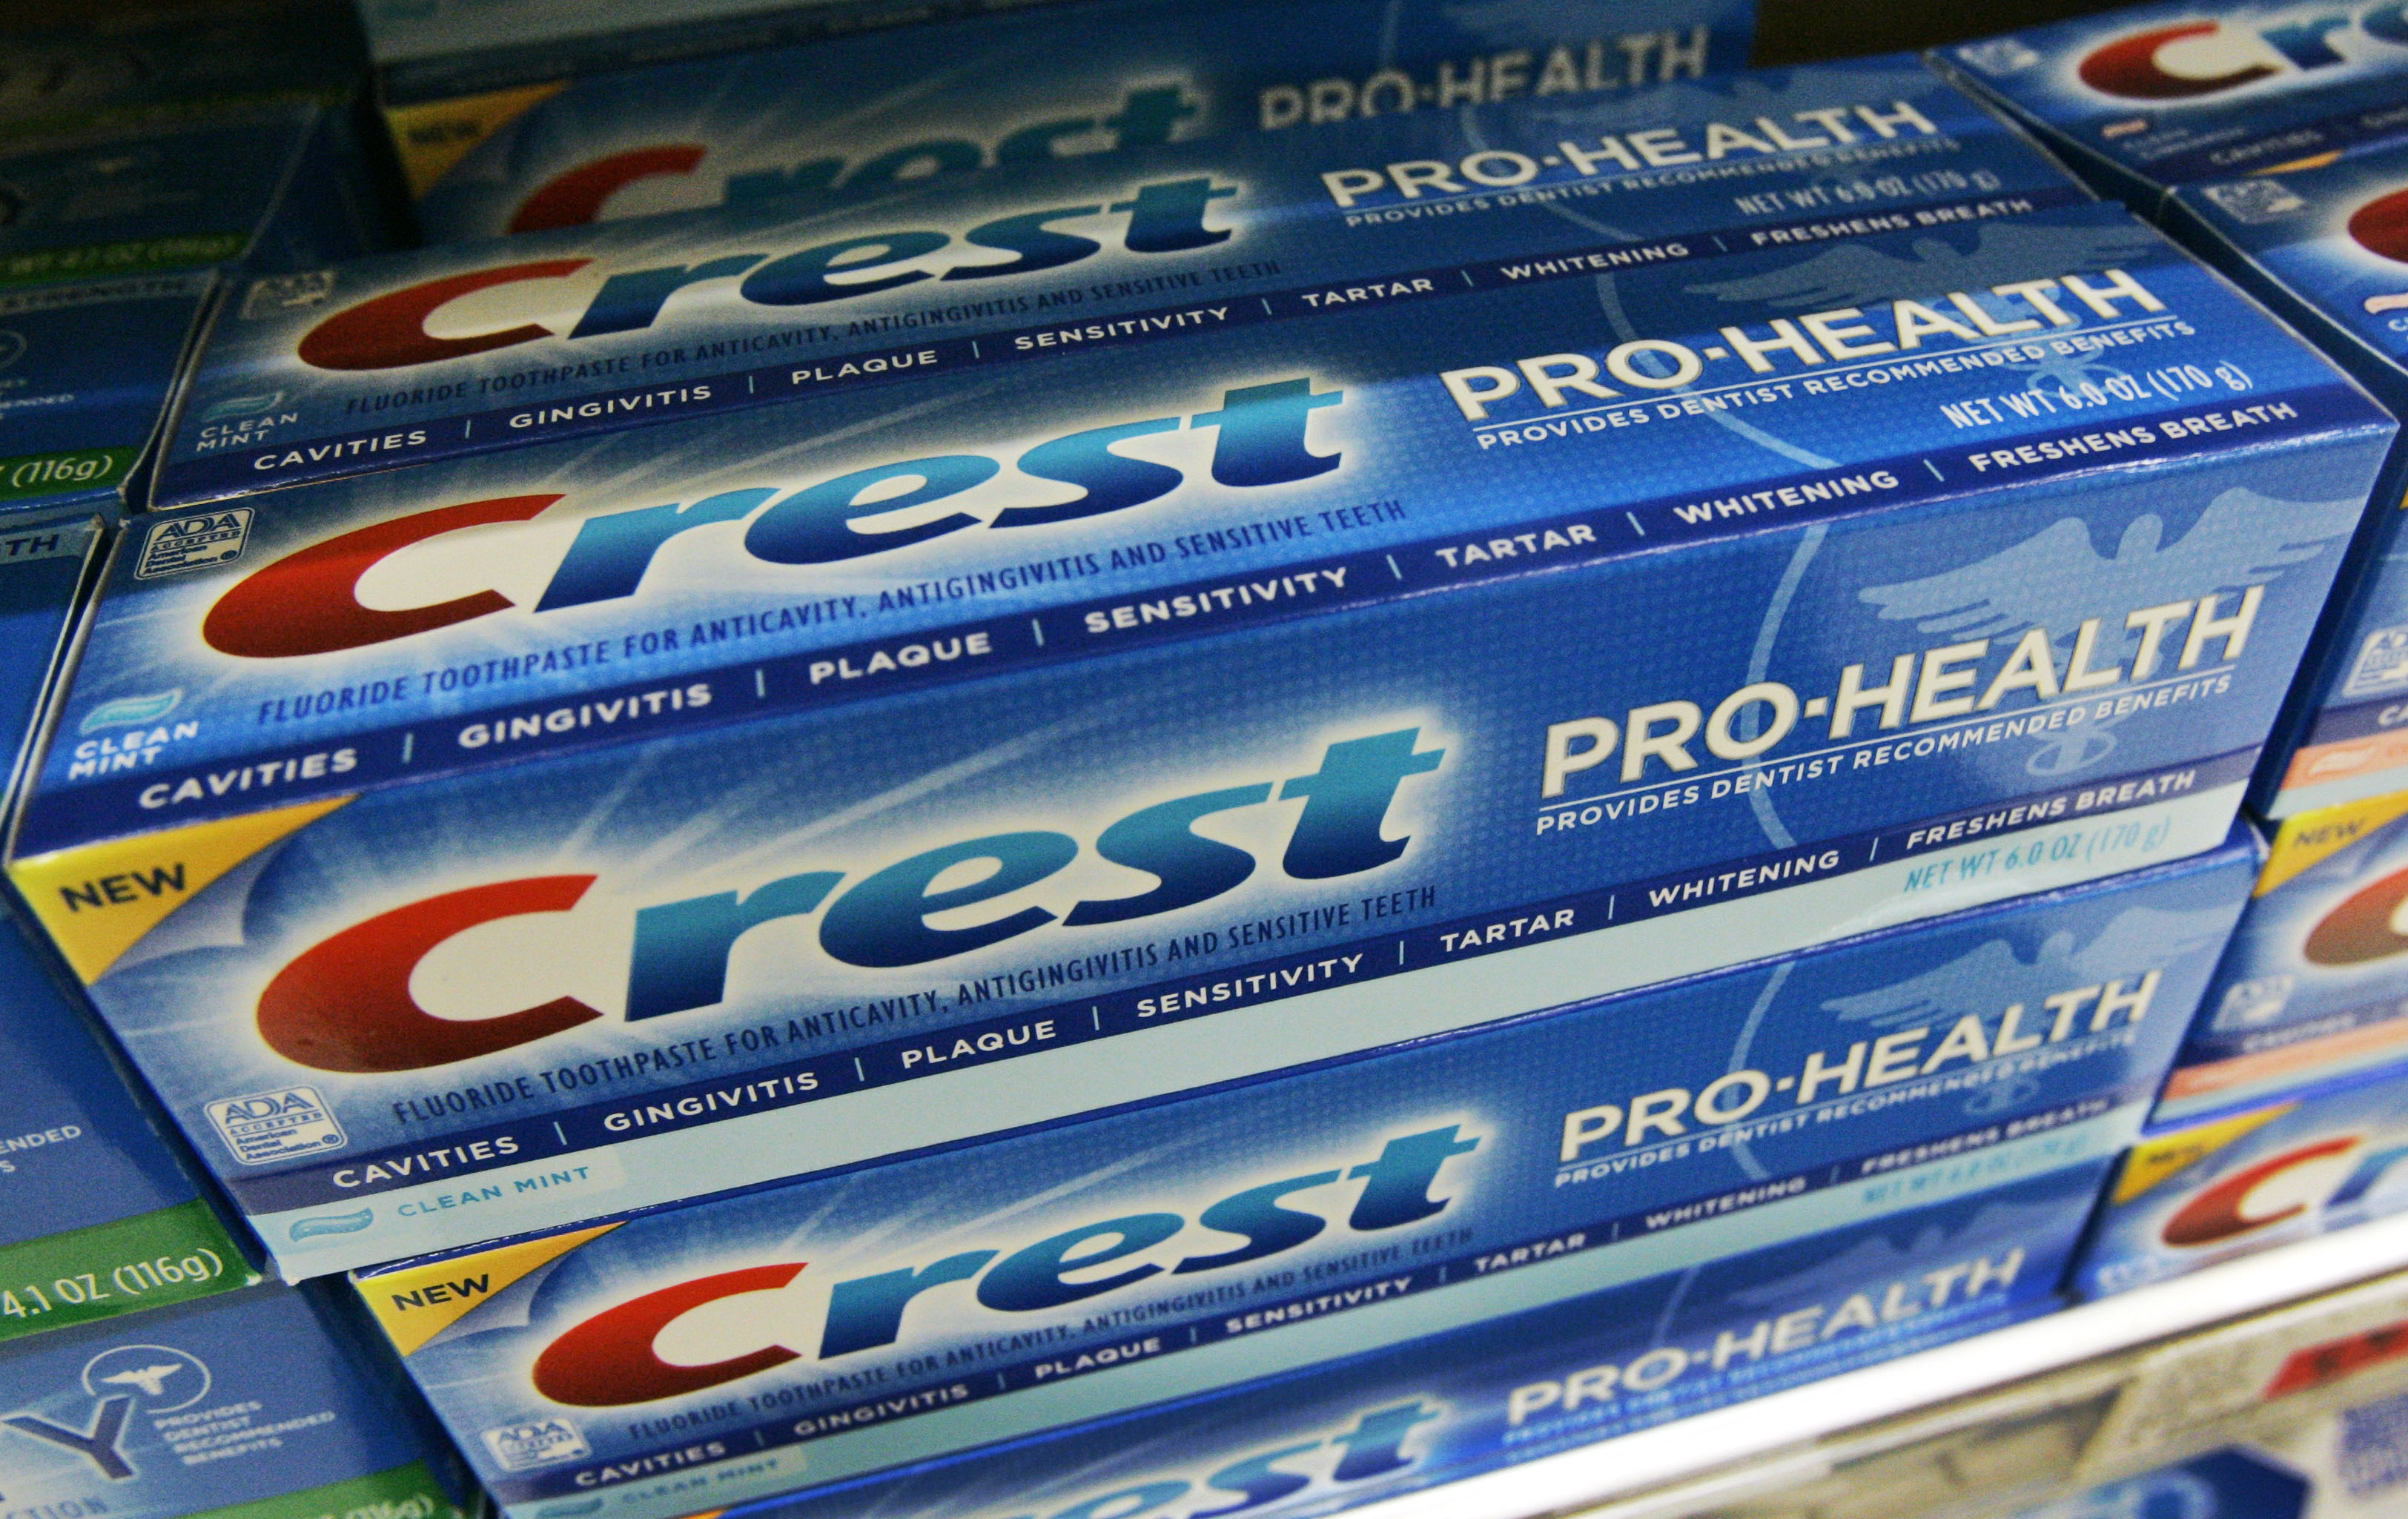 Plastic beads found in some toothpaste could lead to bigger health problems